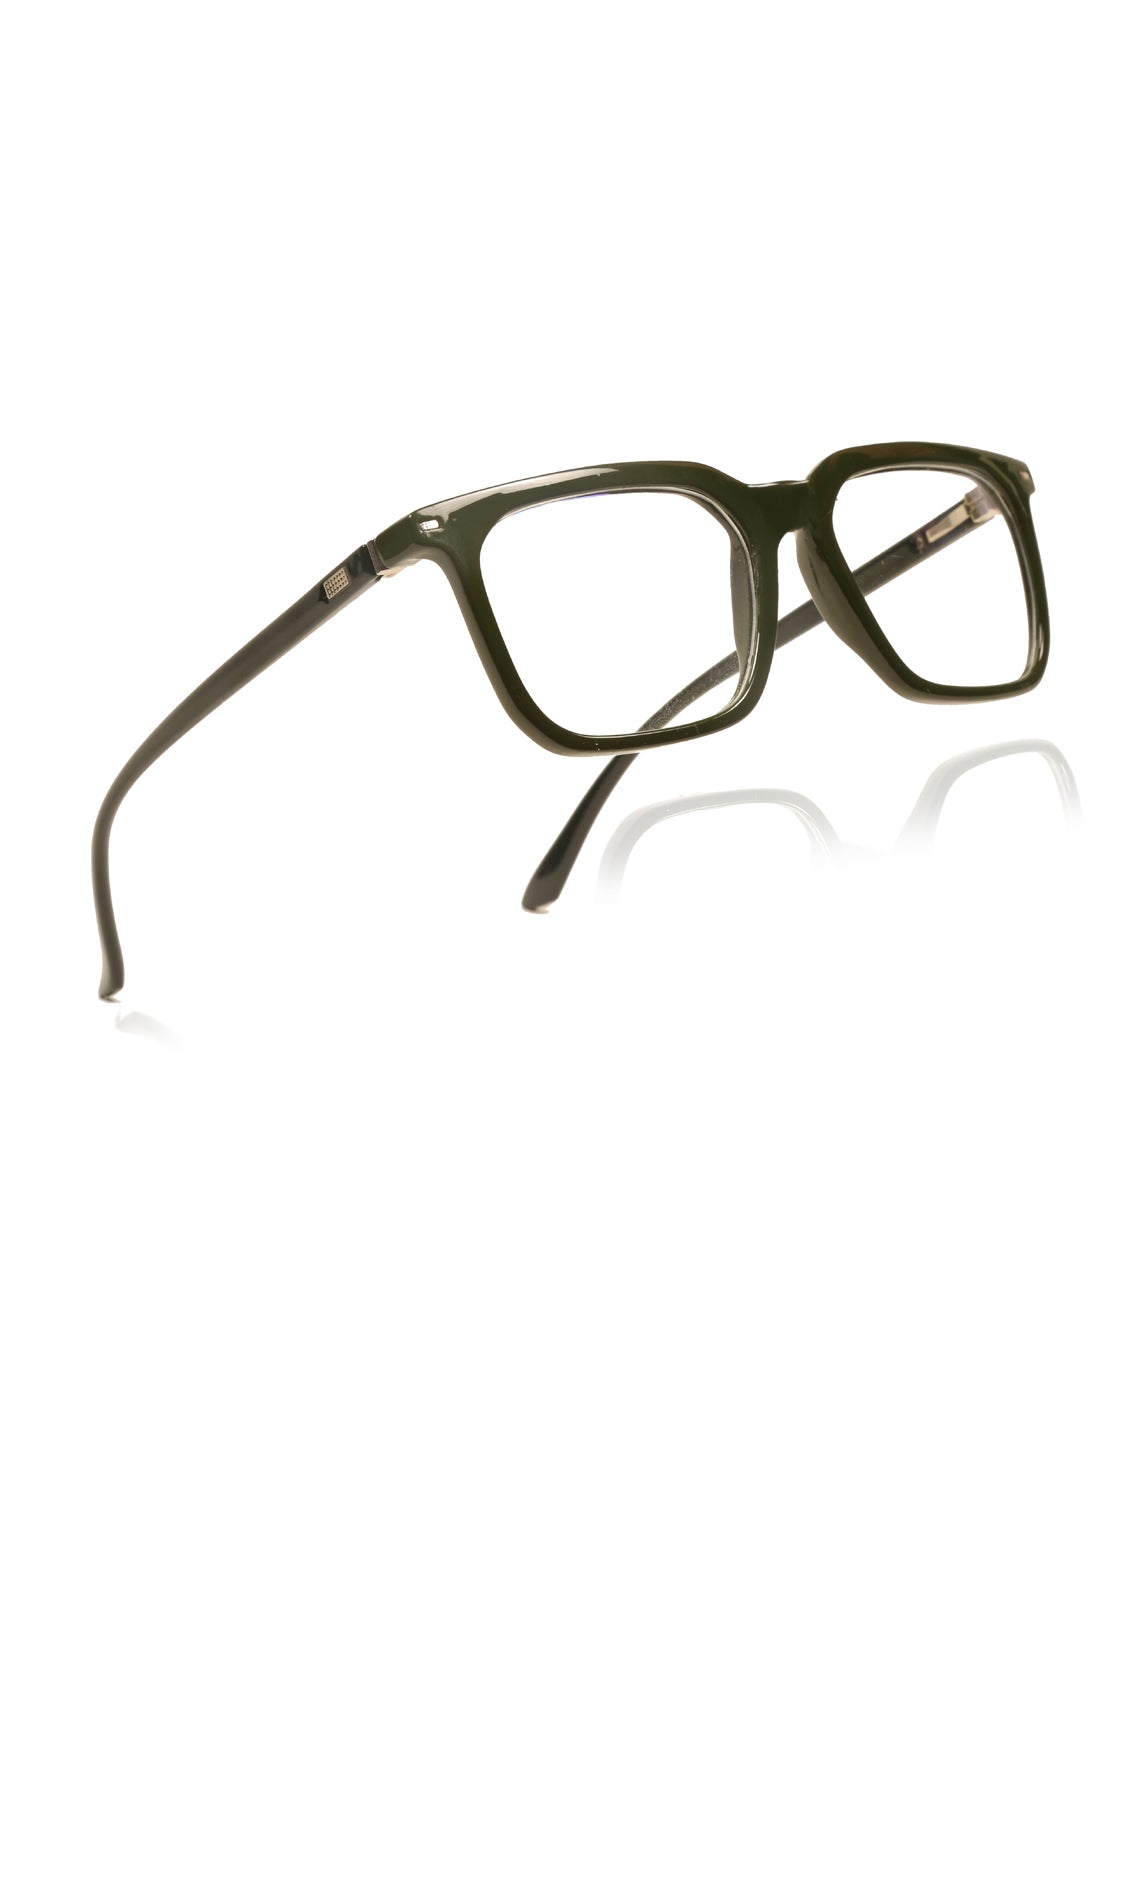 Jodykoes® Colour Frame Series: Stylish Square Spectacle Frames with Blue Ray Protection and Anti-Glare Glasses for Men and Women (Green) - Jodykoes ®